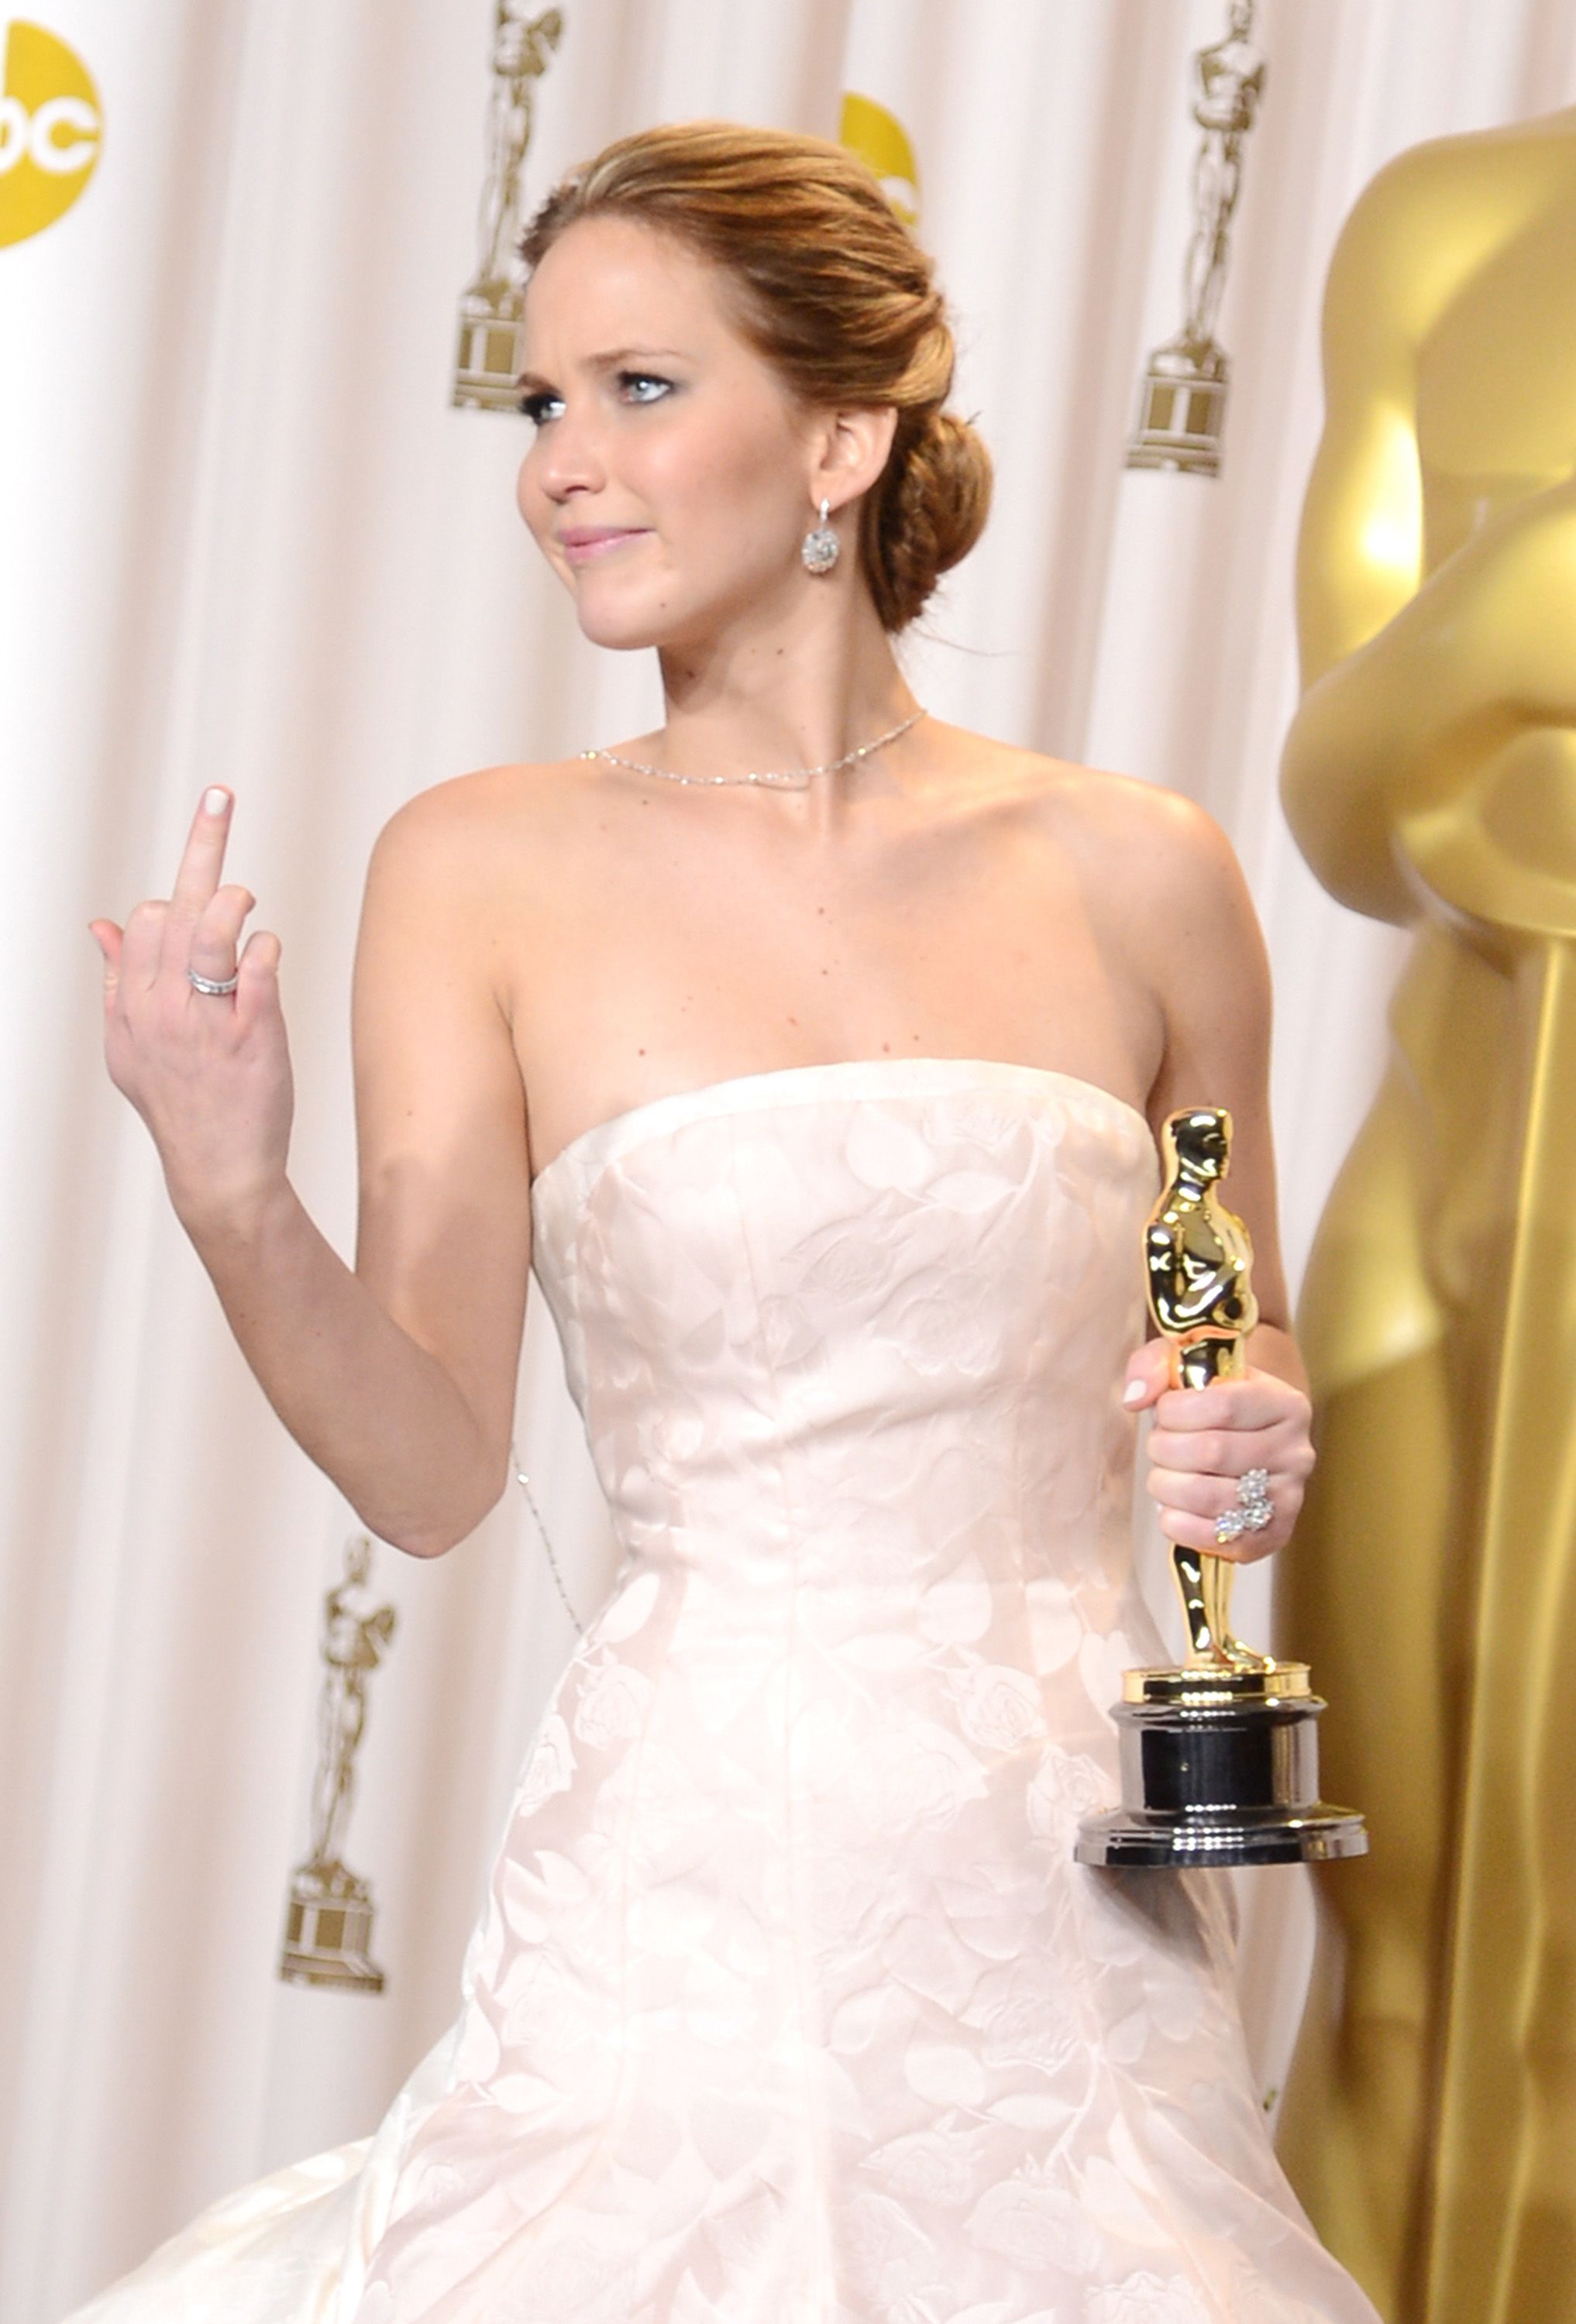 HOLLYWOOD, CA - FEBRUARY 24:  Actress Jennifer Lawrence, winner of the Best Actress award for "Silver Linings Playbook," poses in the press room during the Oscars held at Loews Hollywood Hotel on February 24, 2013 in Hollywood, California.  (Photo by Jason Merritt/Getty Images)